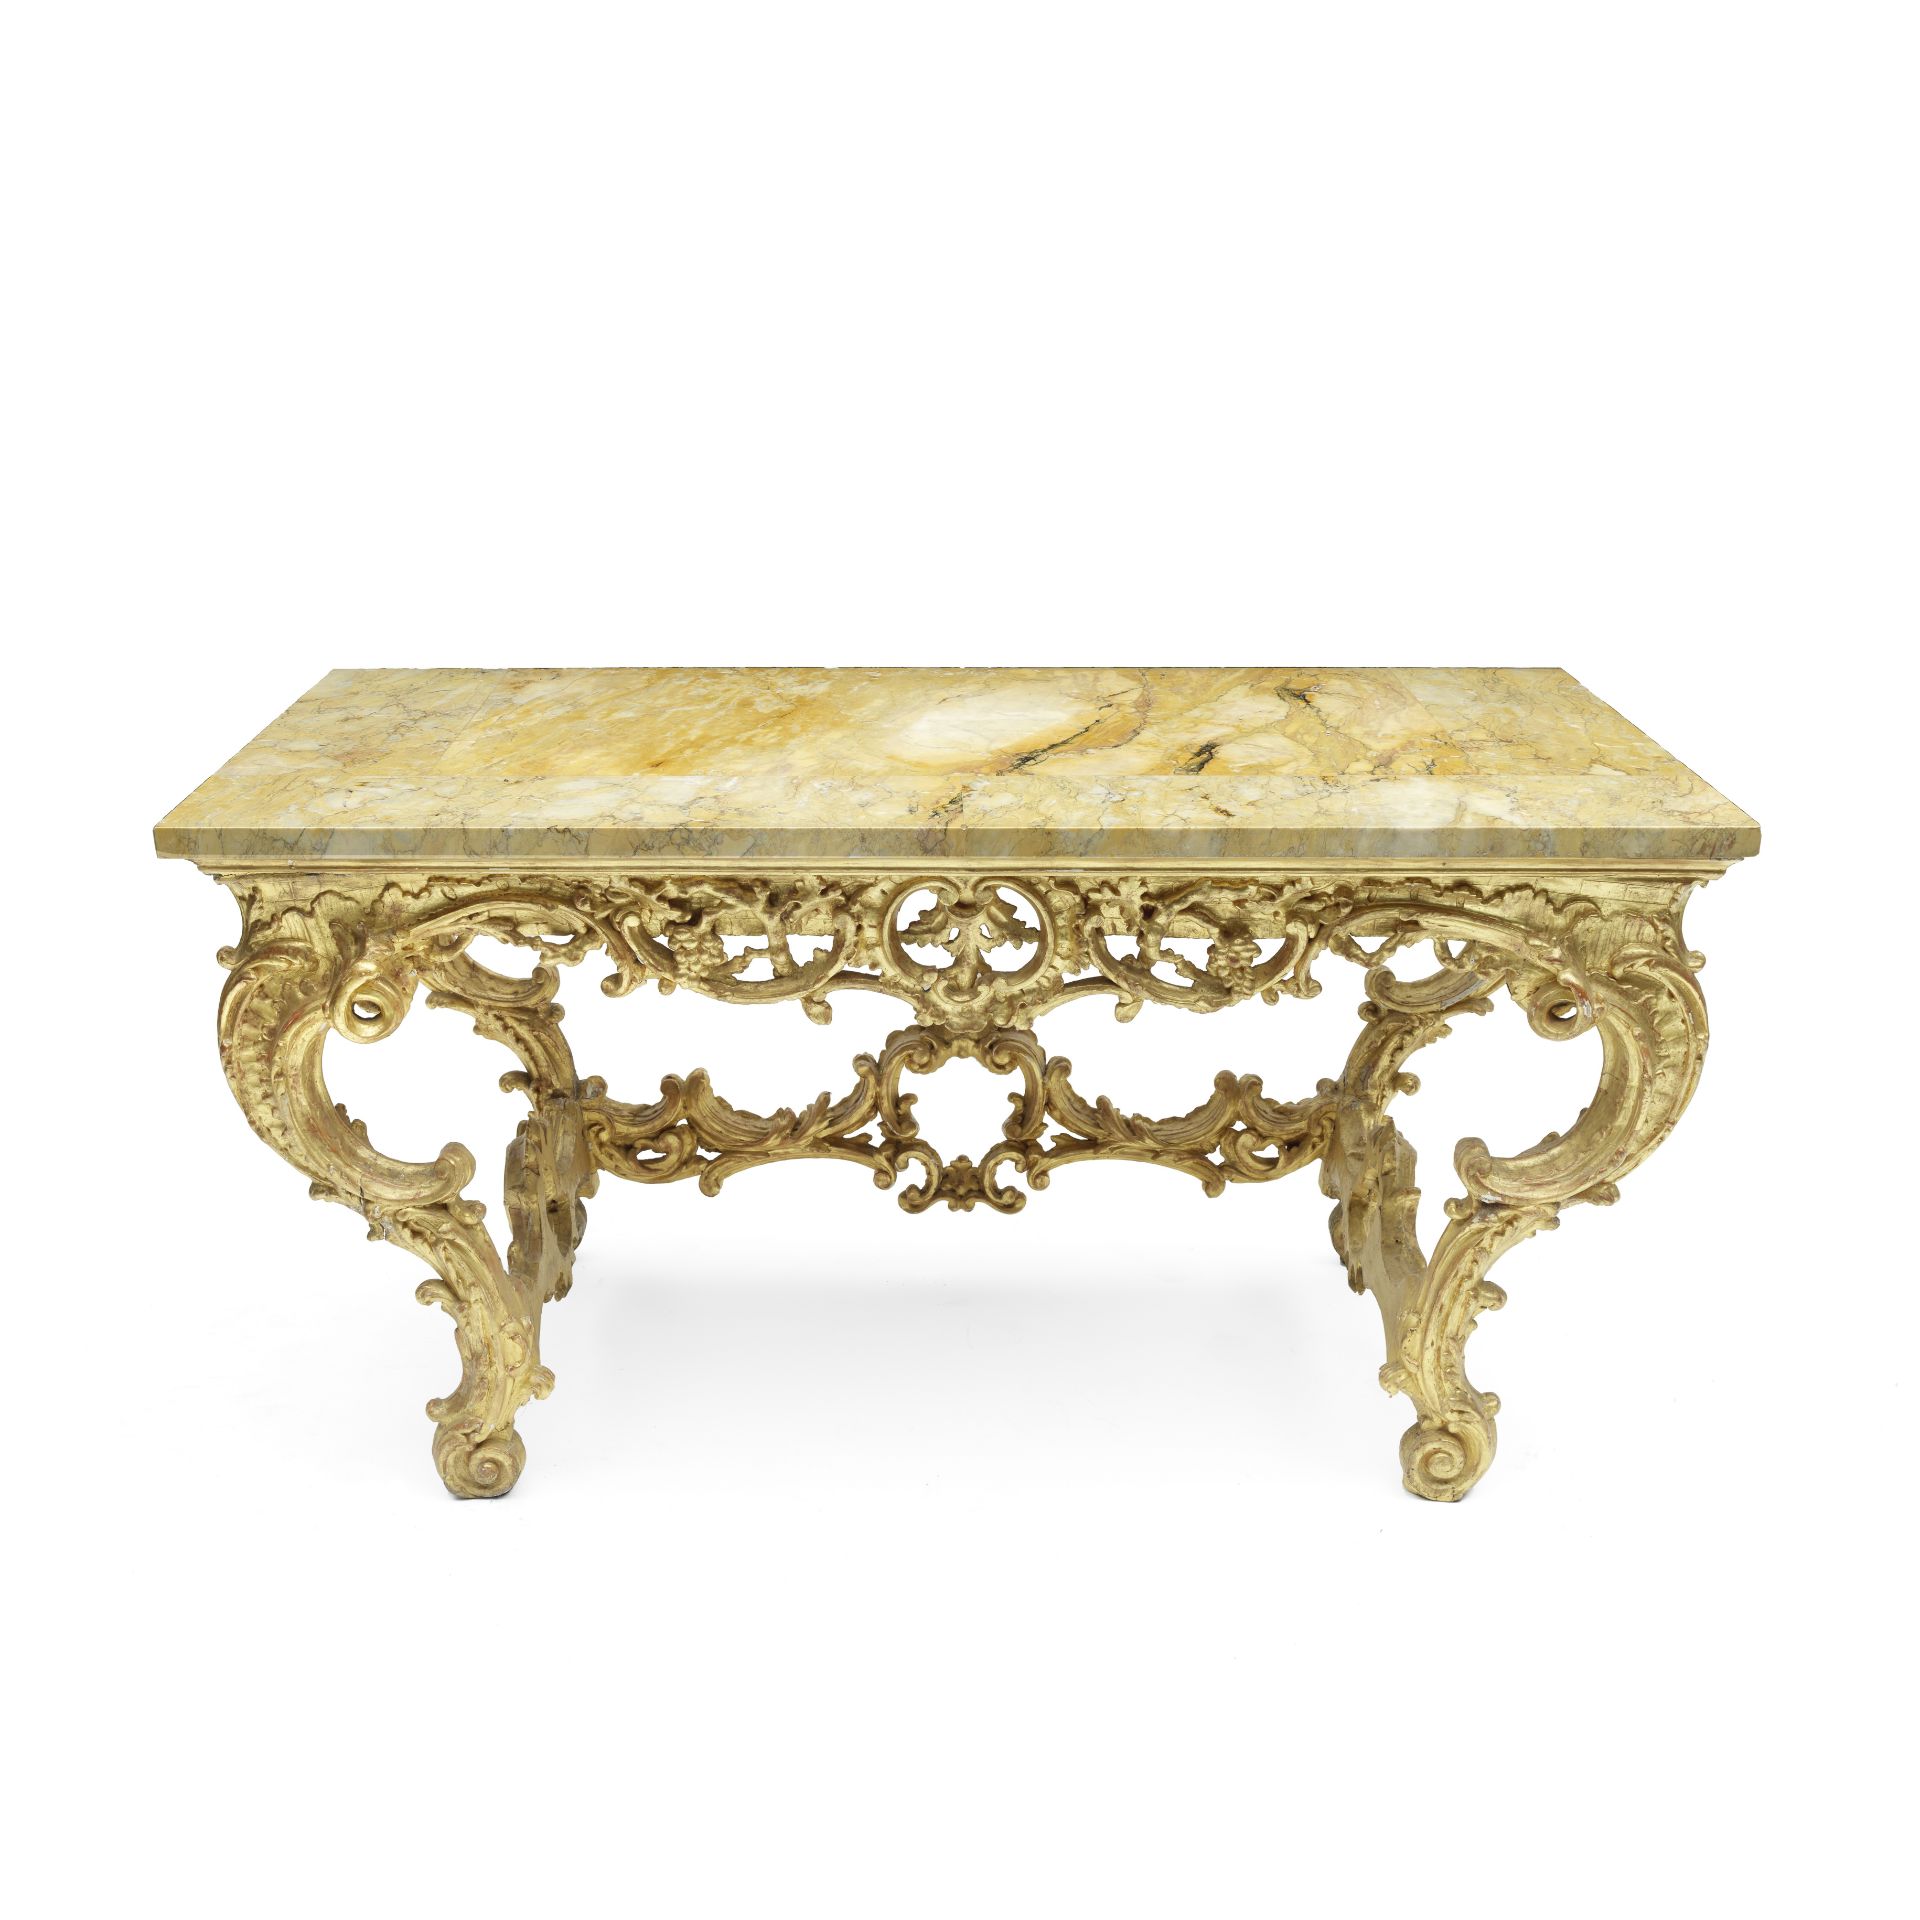 A carved giltwood console table Italian, 18th century